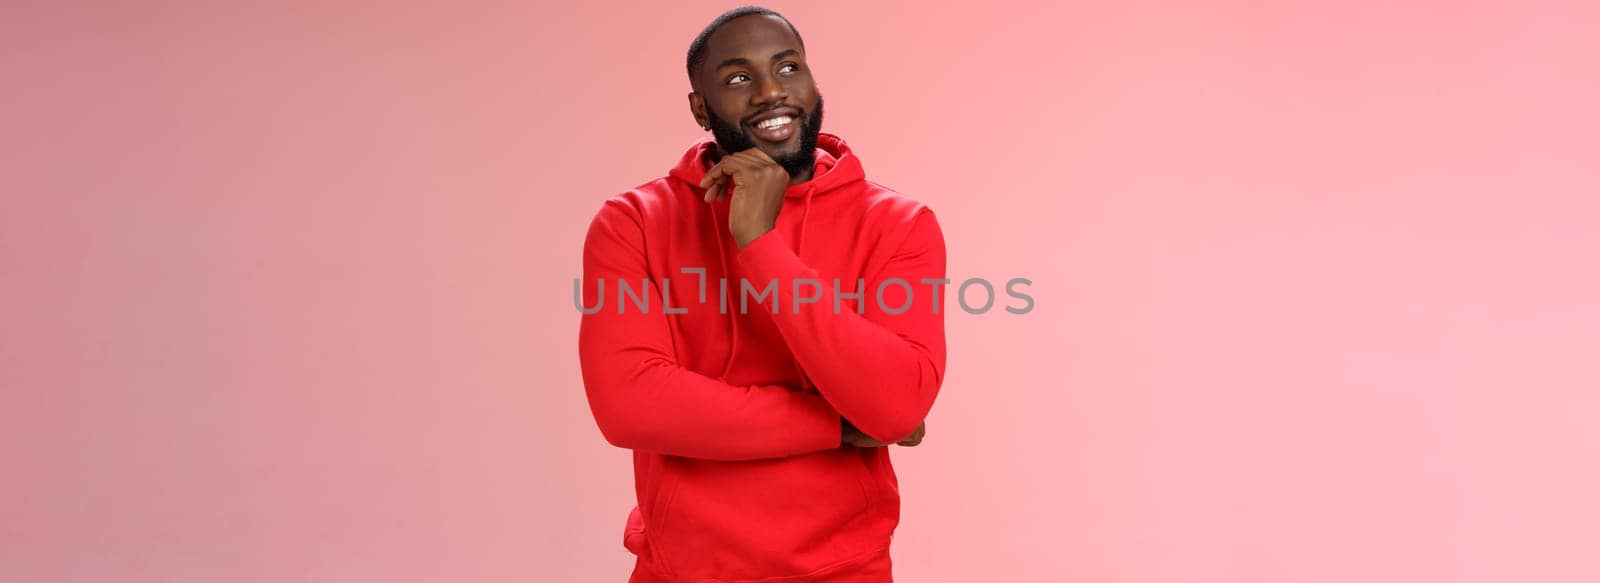 Inetersted successful young black sportsman considering take opportunity look curious upper left corner thinking touch chin thoughtful, make decision choosing what pick, pink background.